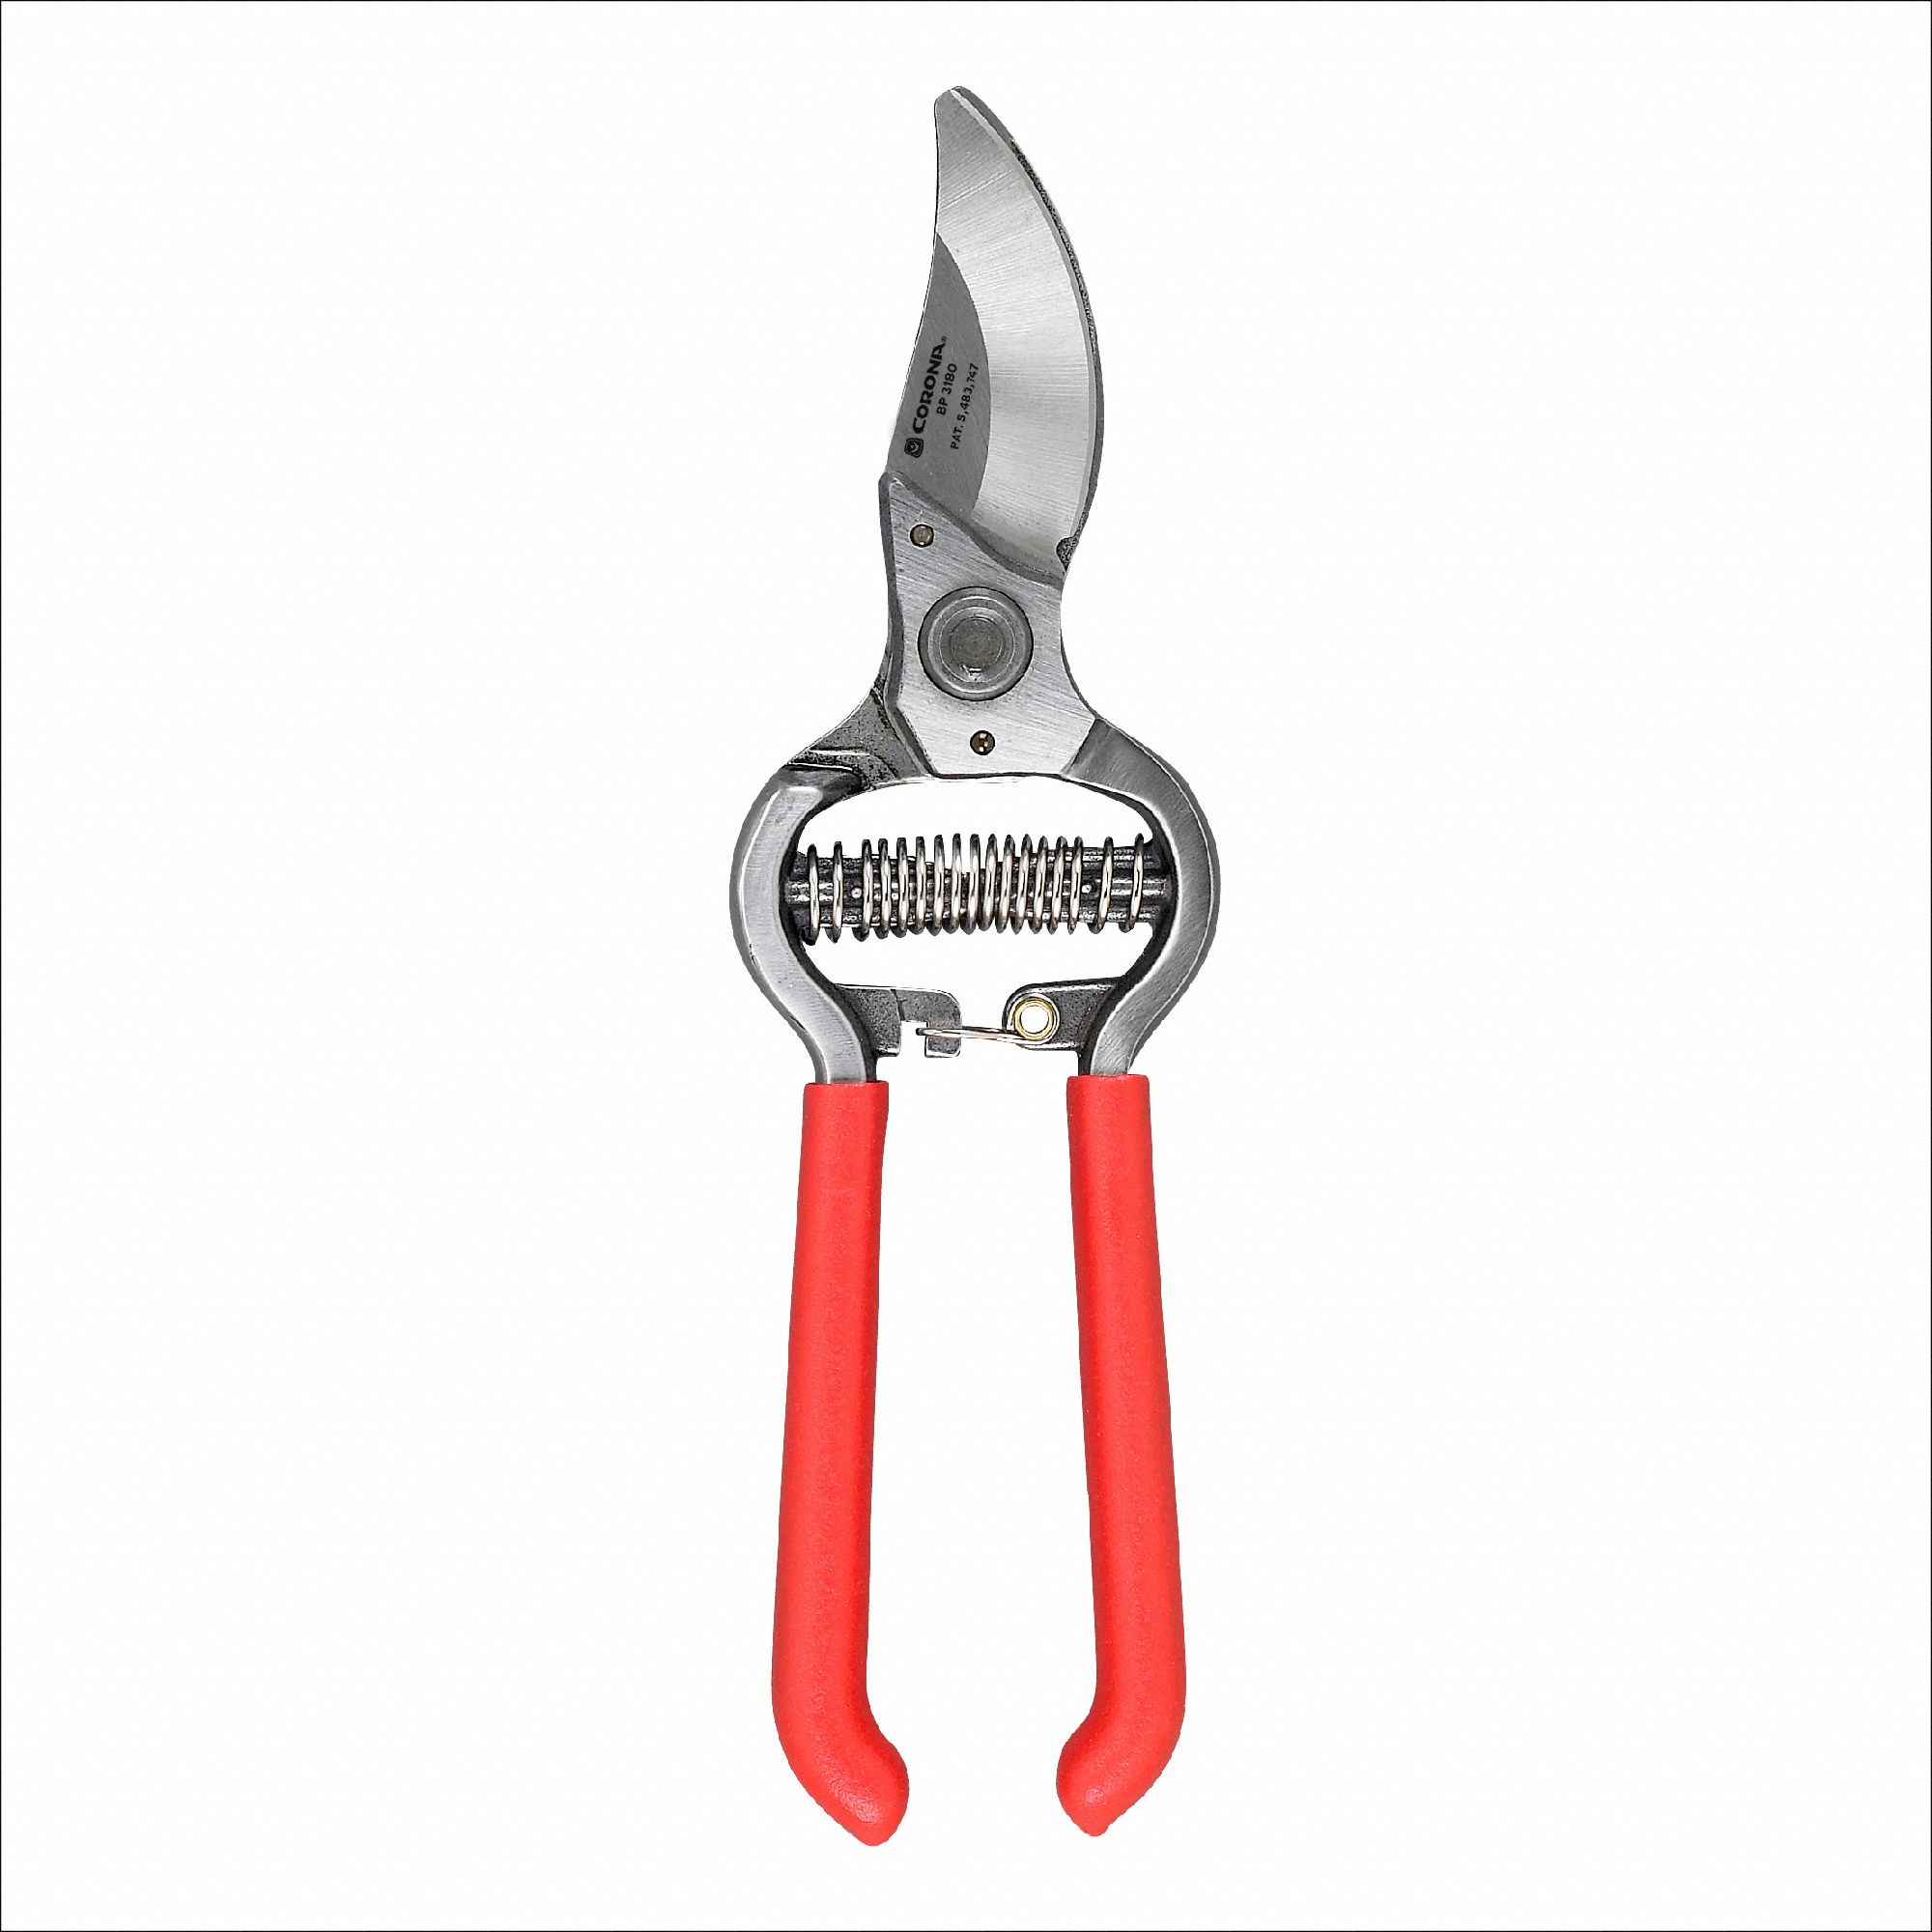 Bypass Pruner: 2 1/2 in Blade Lg, 8 3/4 in Overall Lg, 1 in, Steel, Metal